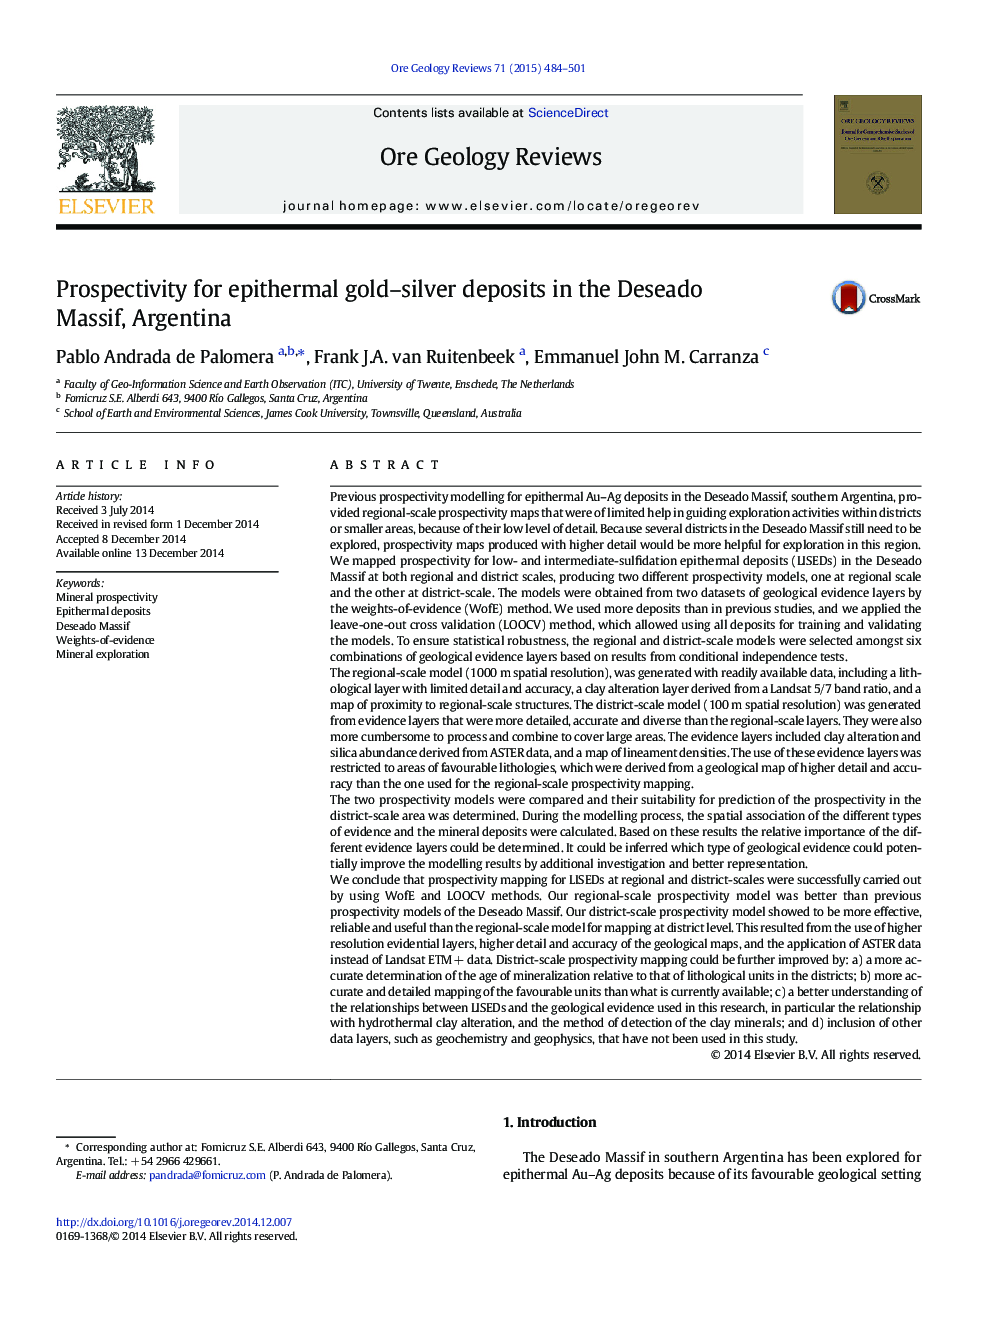 Prospectivity for epithermal gold–silver deposits in the Deseado Massif, Argentina